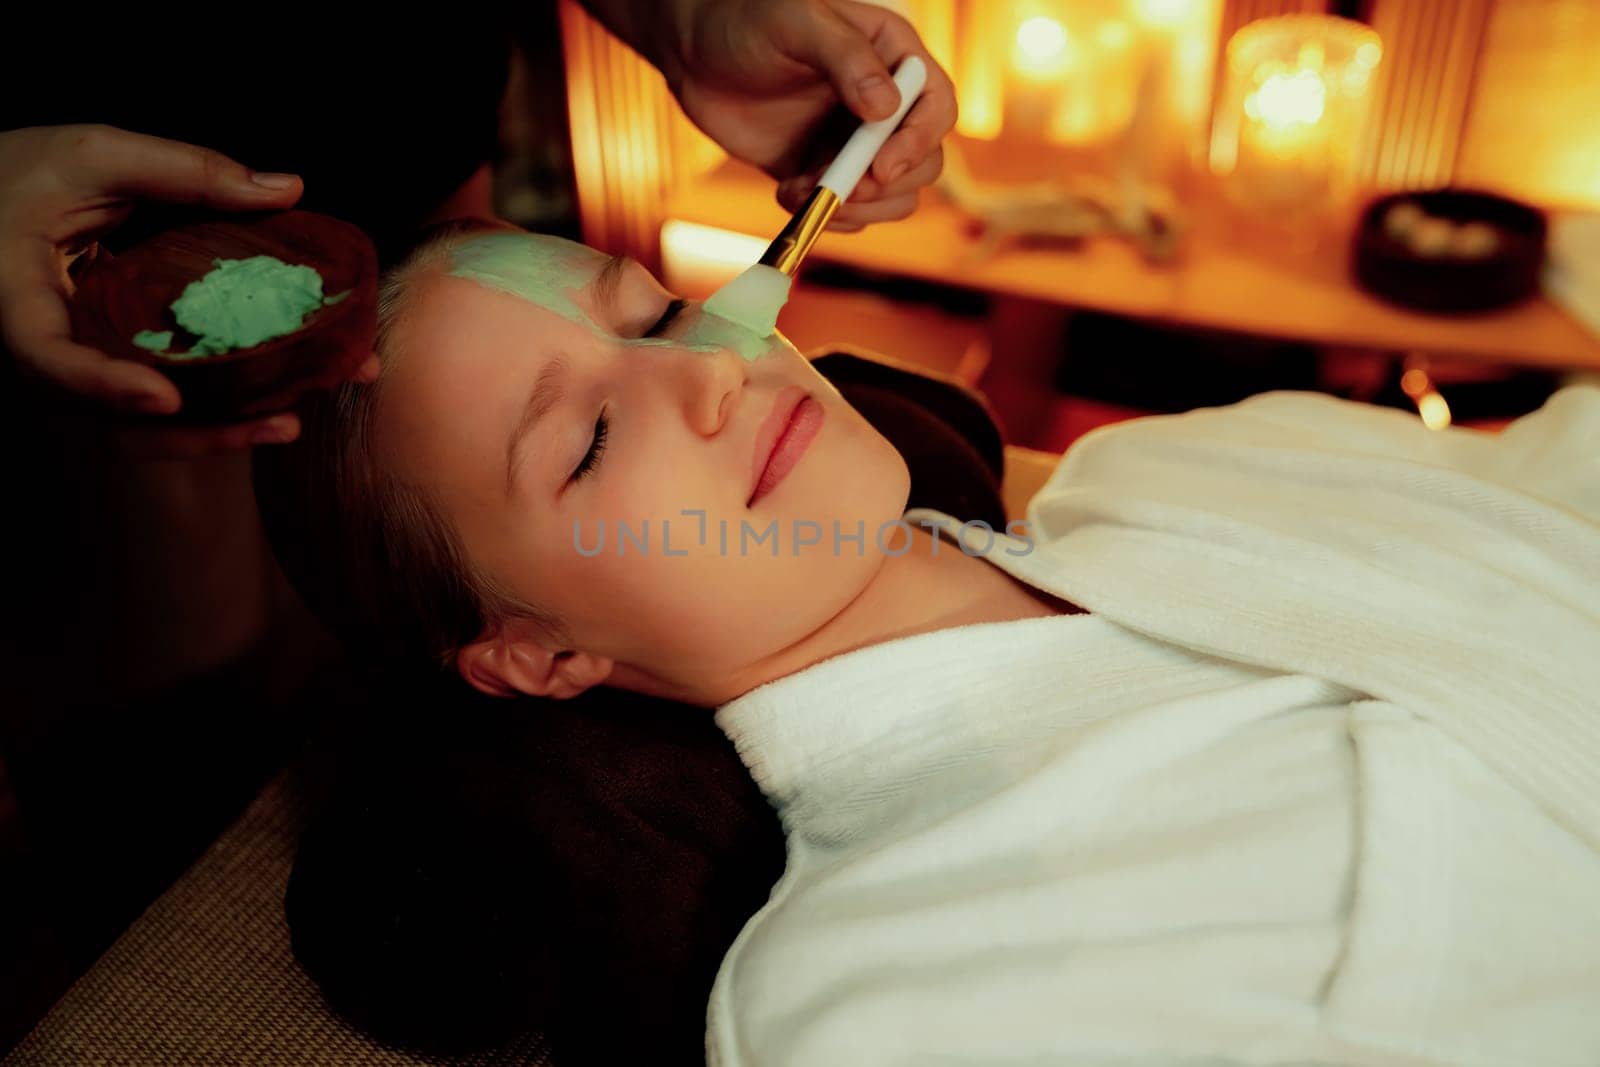 Serene ambiance of spa salon, woman customer indulges in rejuvenating with luxurious face cream massage with warm lighting candle. Facial skin treatment and beauty care concept. Quiescent